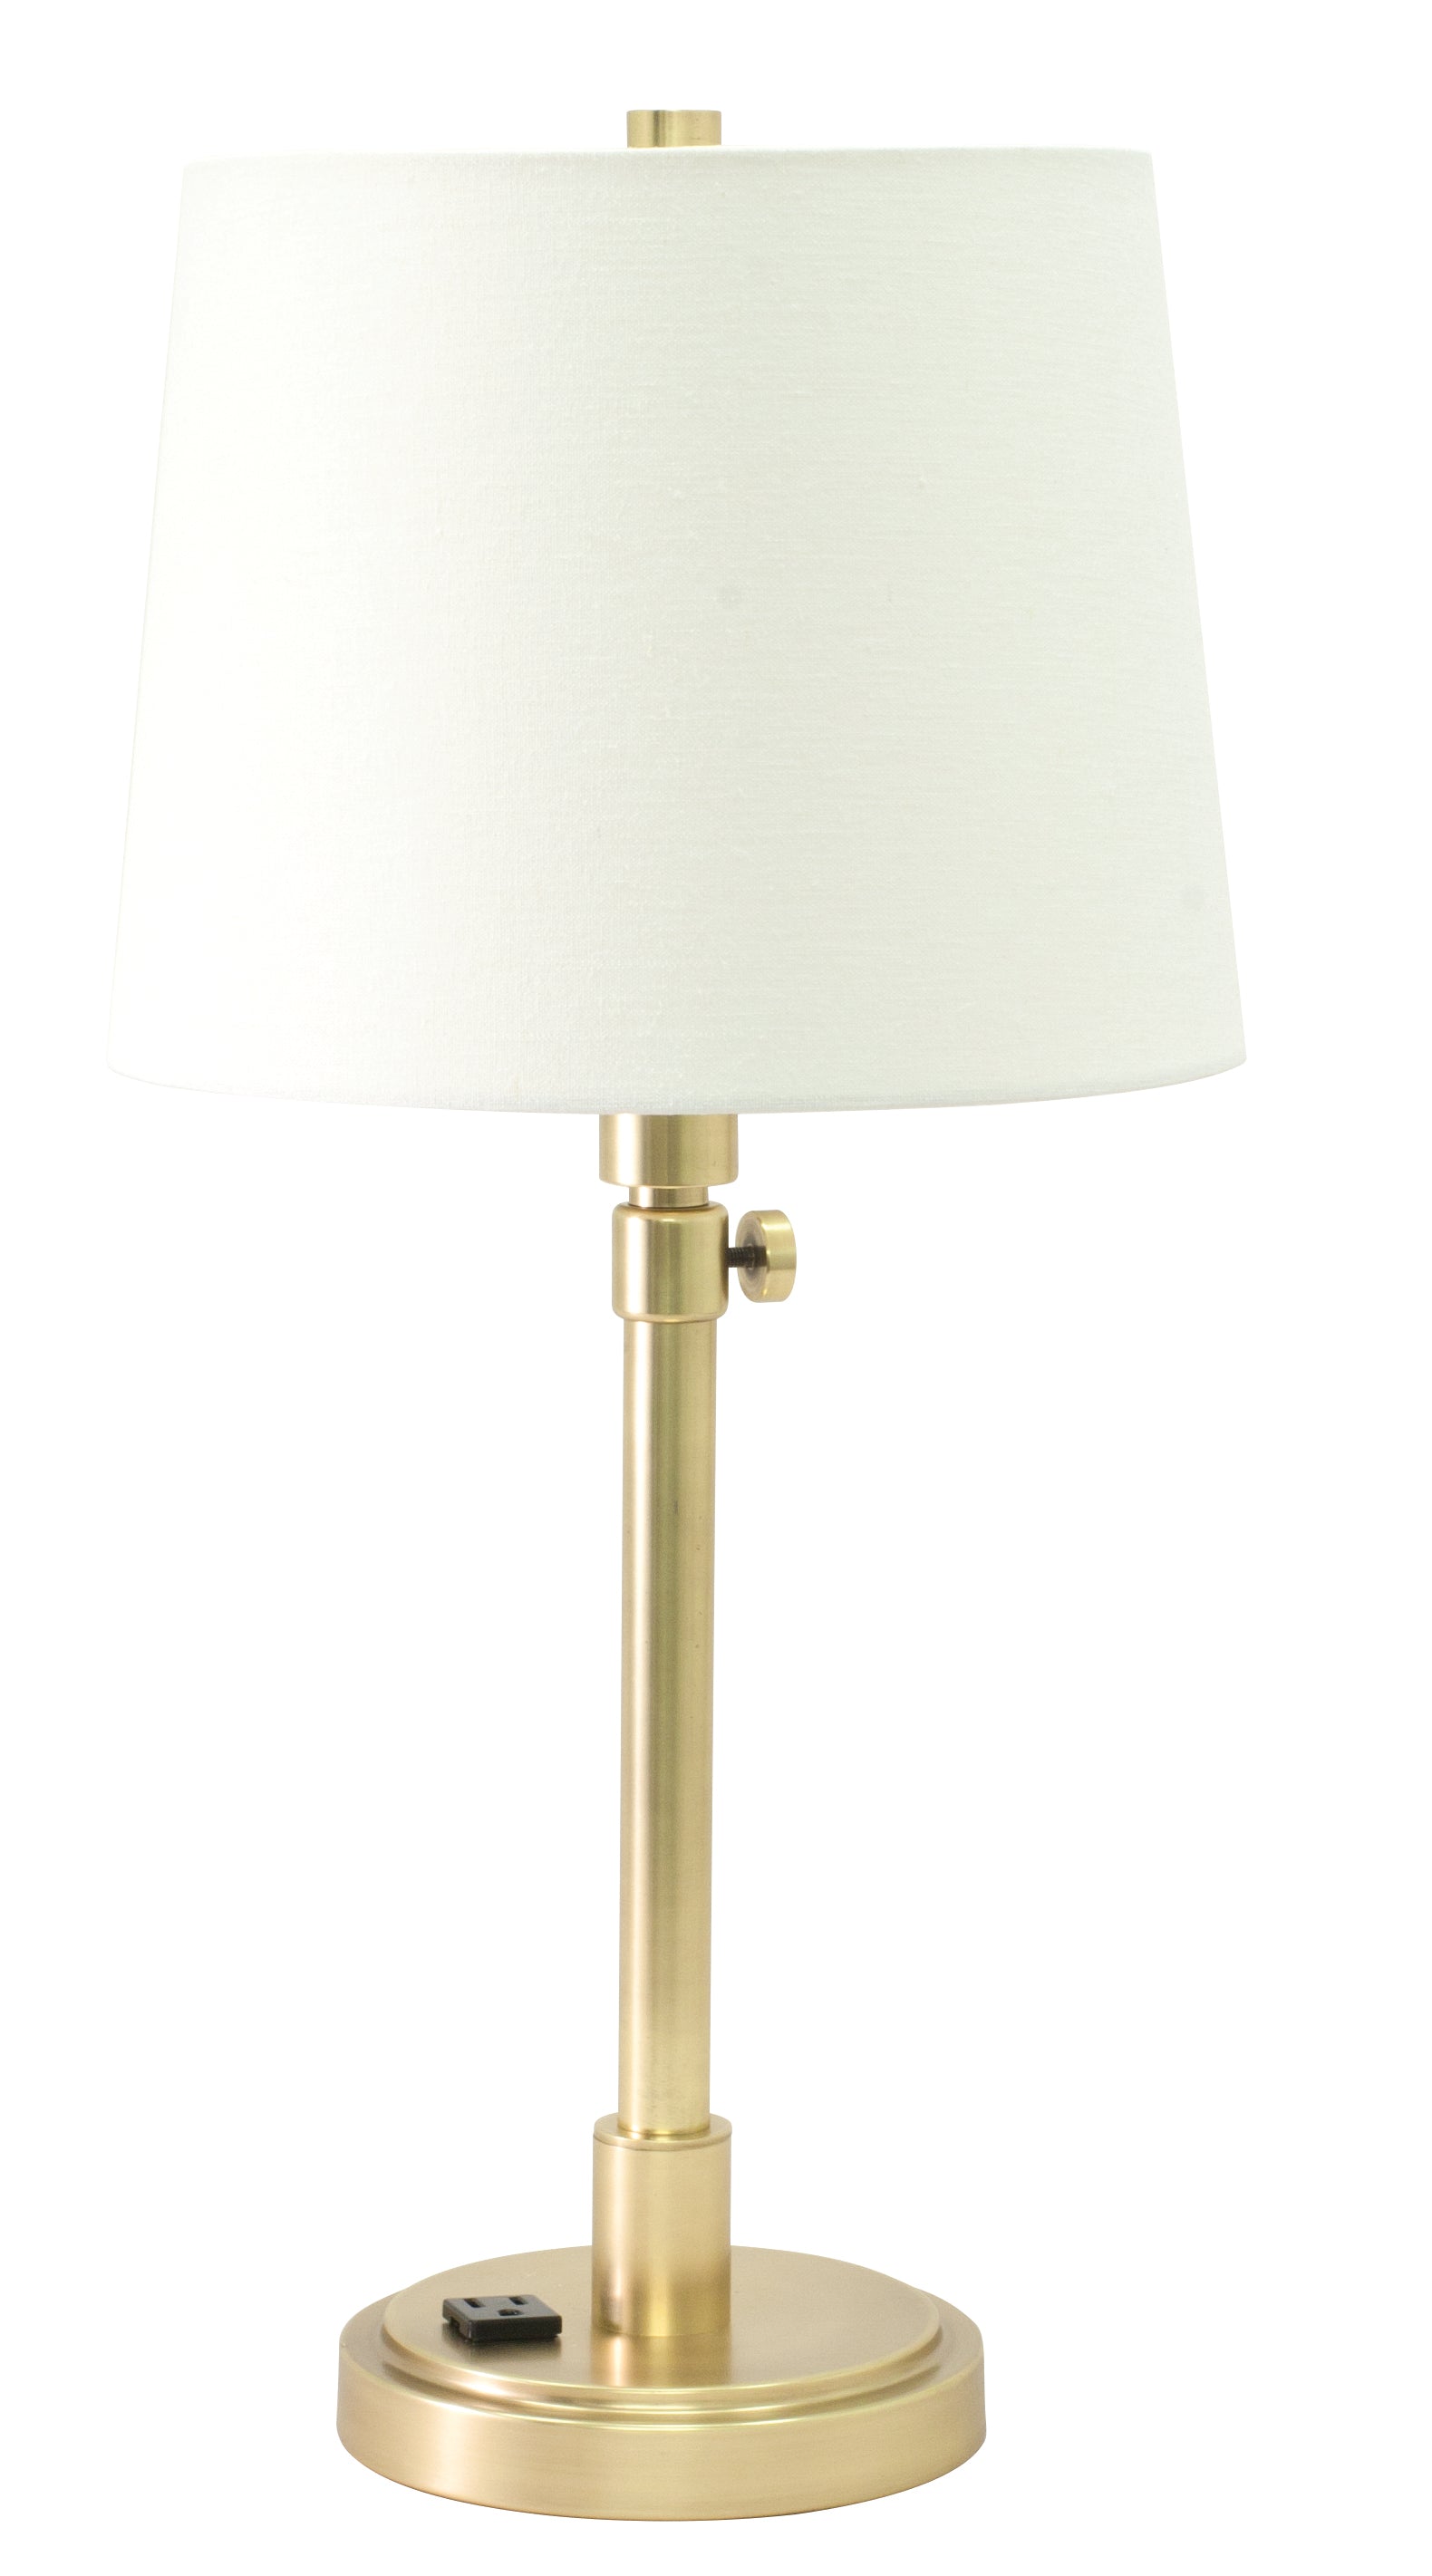 House of Troy Townhouse Adjustable Table Lamp in Raw Brass with Convenience Outlet TH751-RB